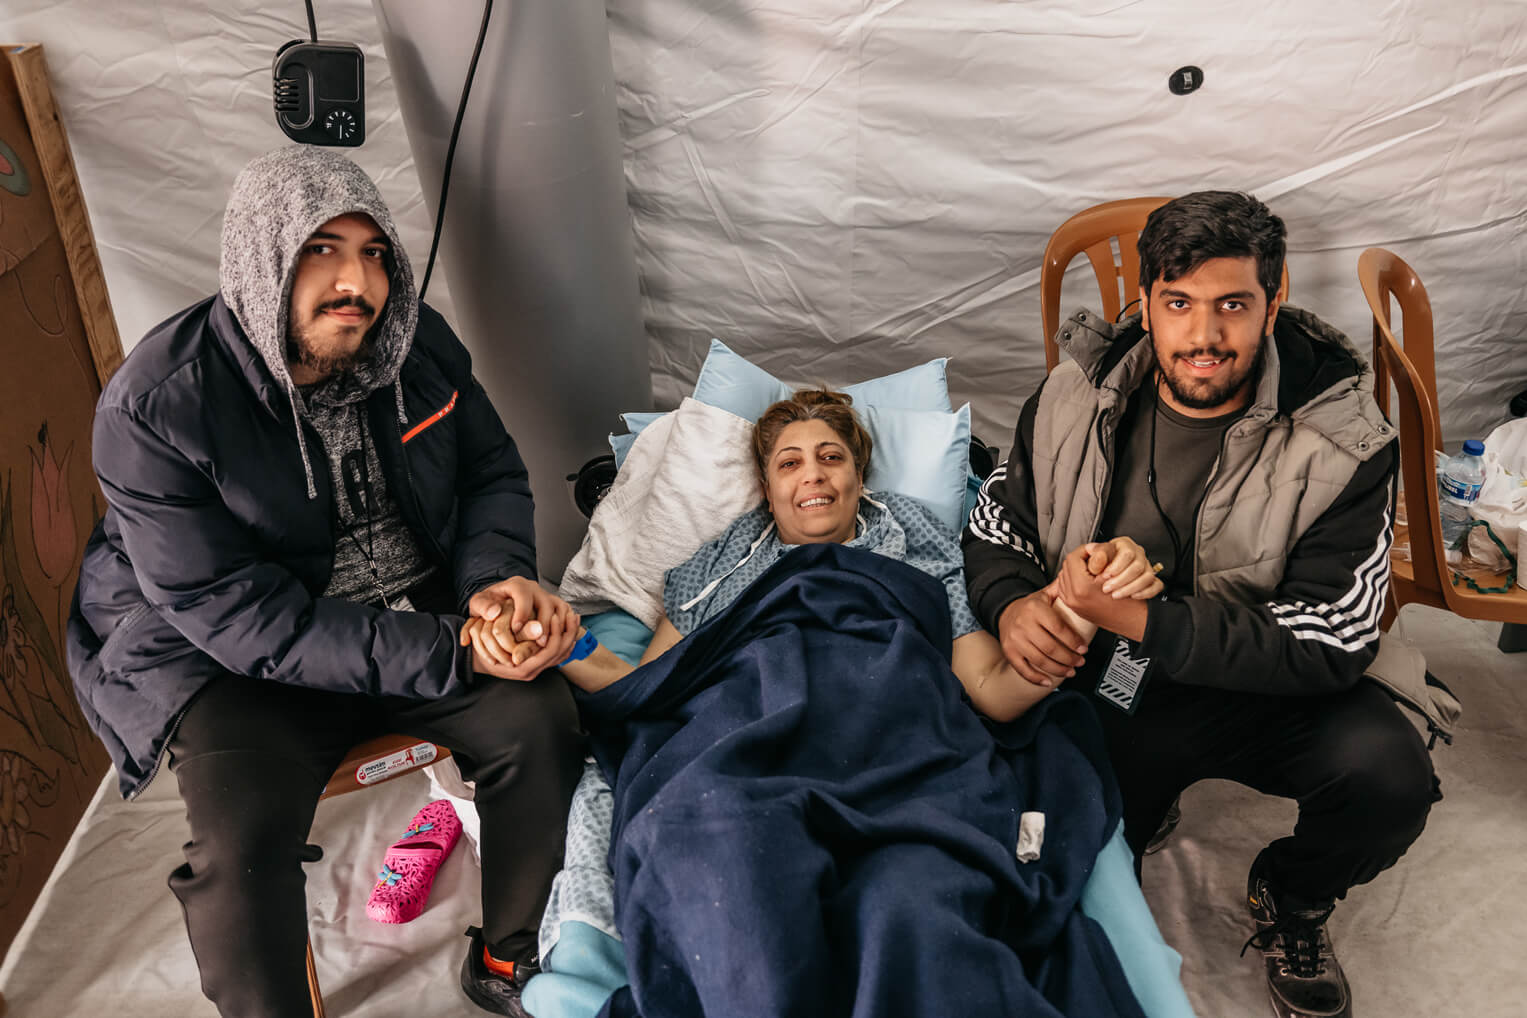 Damla was visited by her husband and sons as she recovers at our hospital.